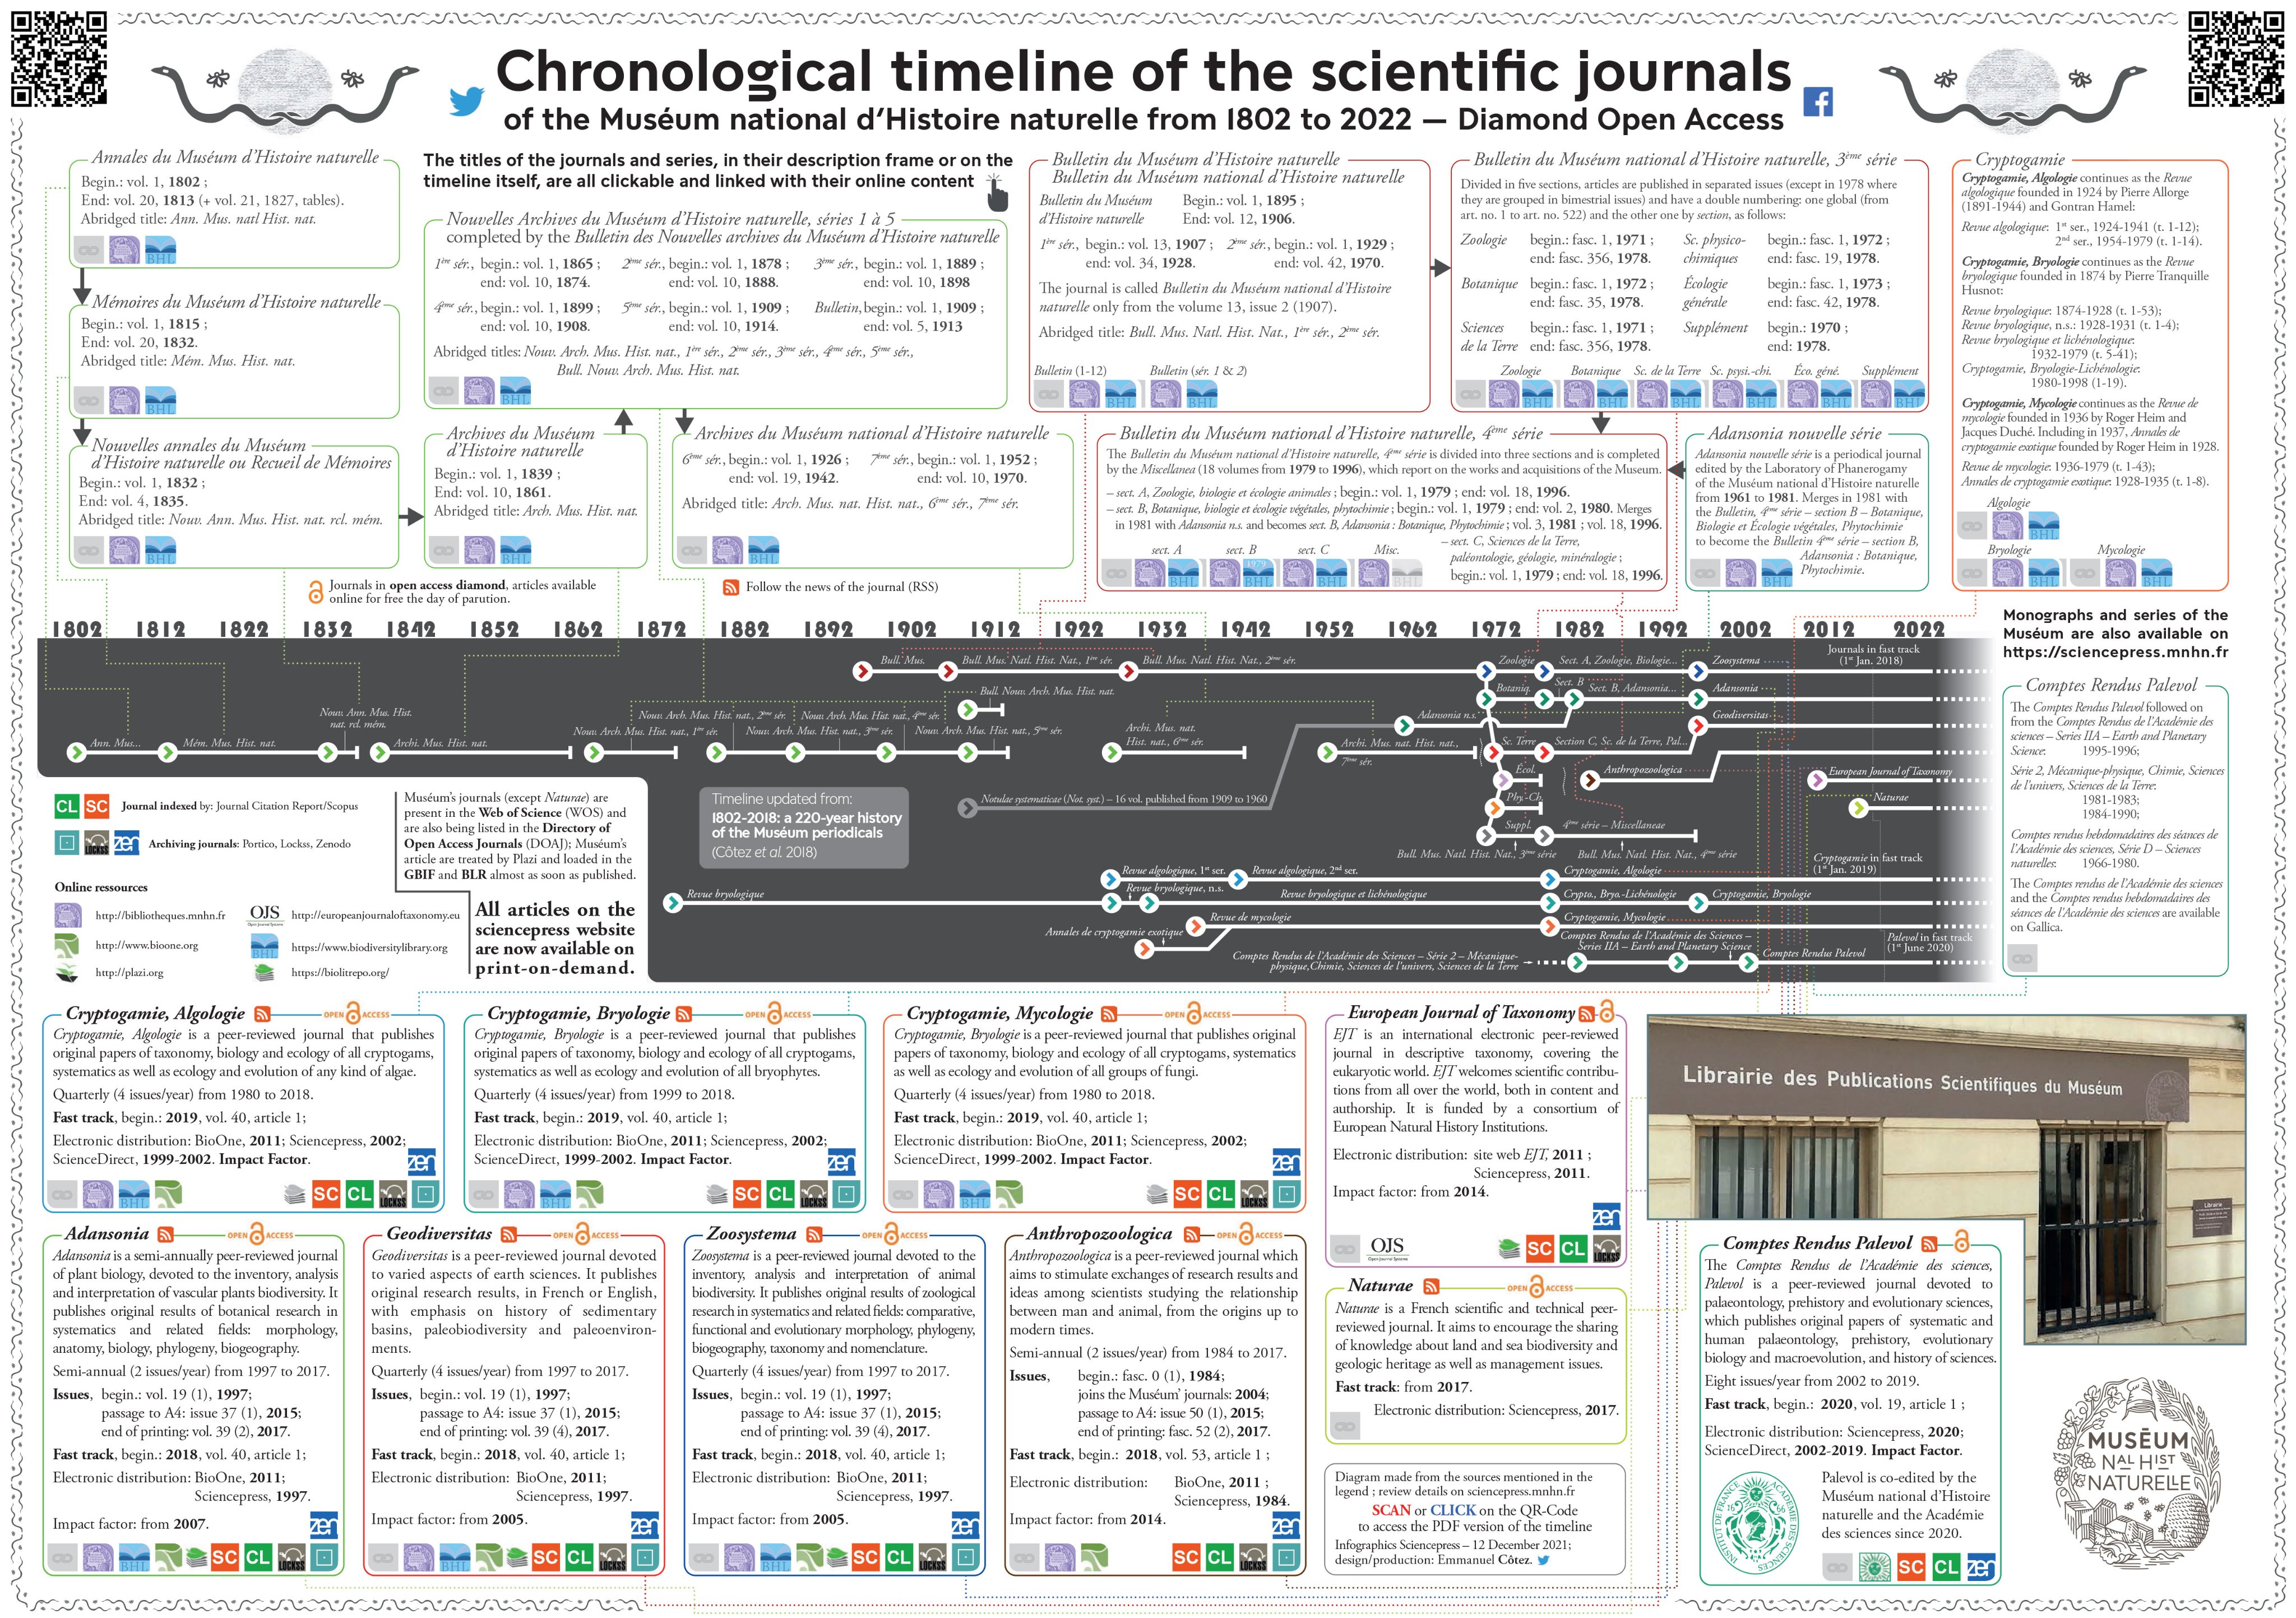 Give Me Five 4e Manuel Numérique CETAF on Twitter: "WOW! 220 years of history at a glance! Here's the  chronological timeline of the scientific journals of @Le_Museum! Needless  to say, the PDF version is linked 🔁 with the